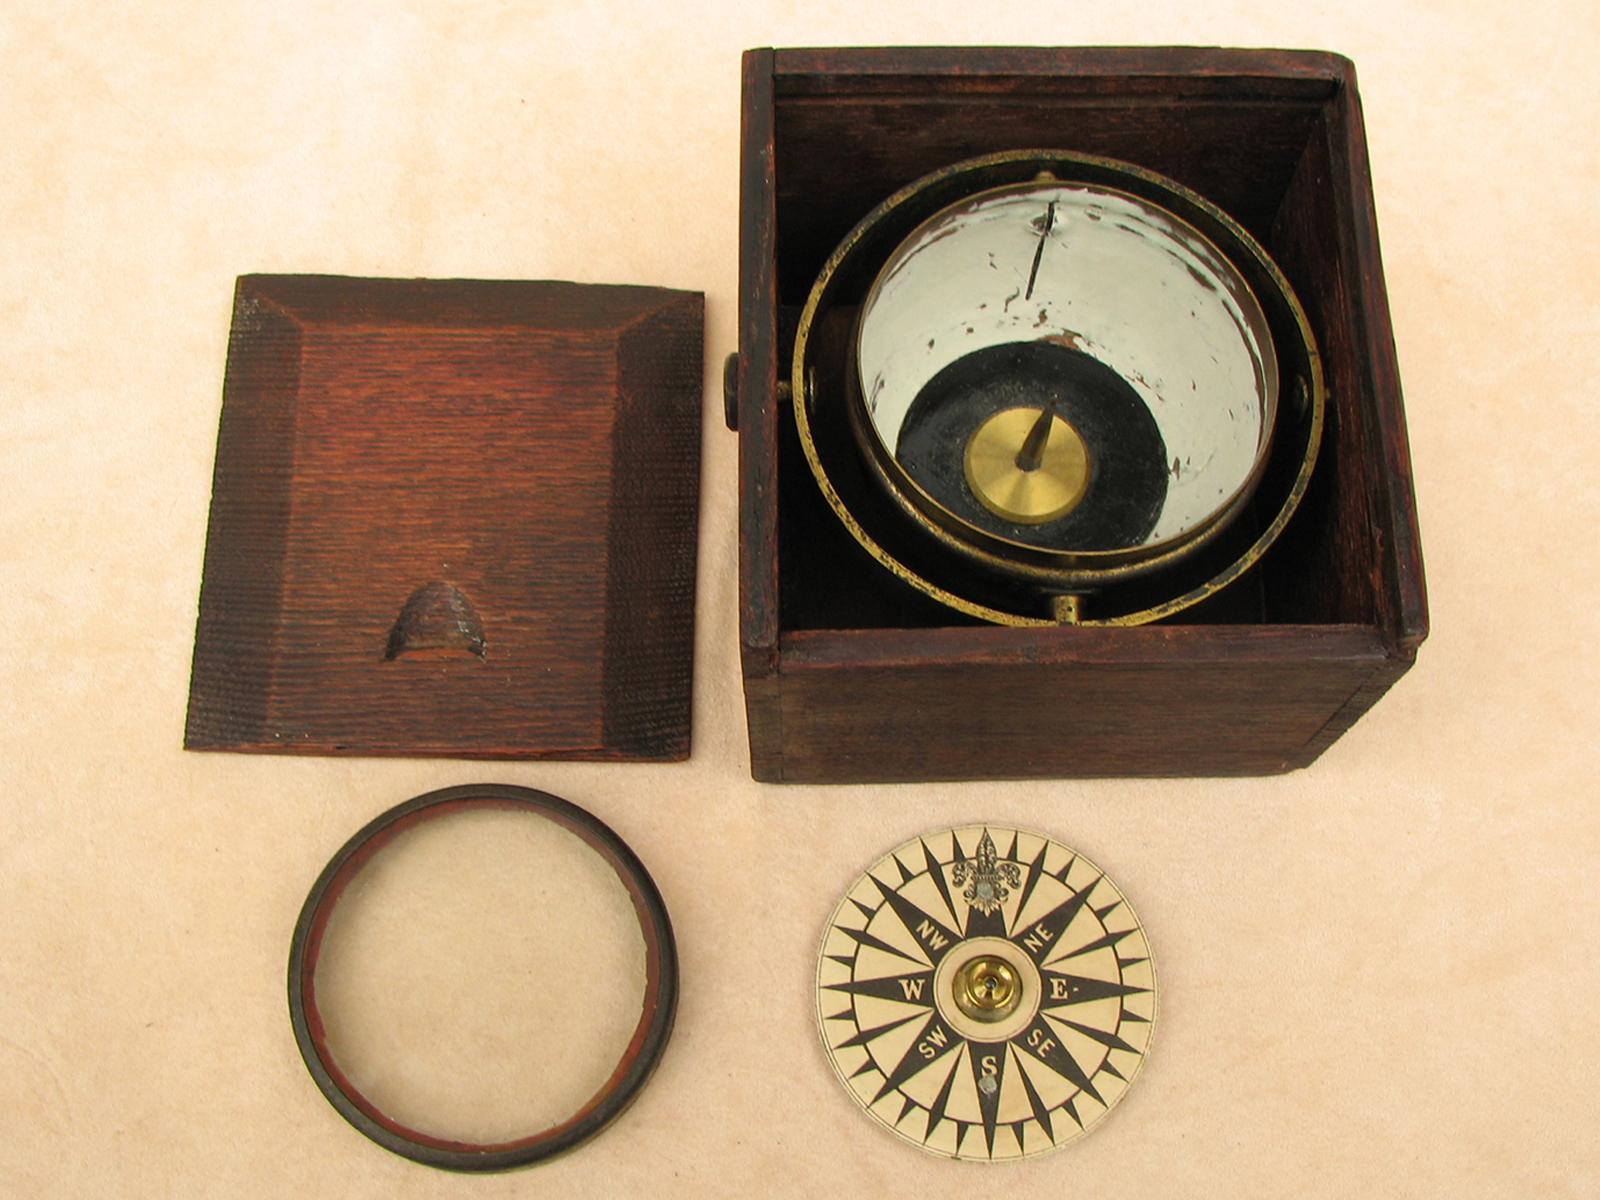 19th century Mariners gimbal compass mounted in mahogany case